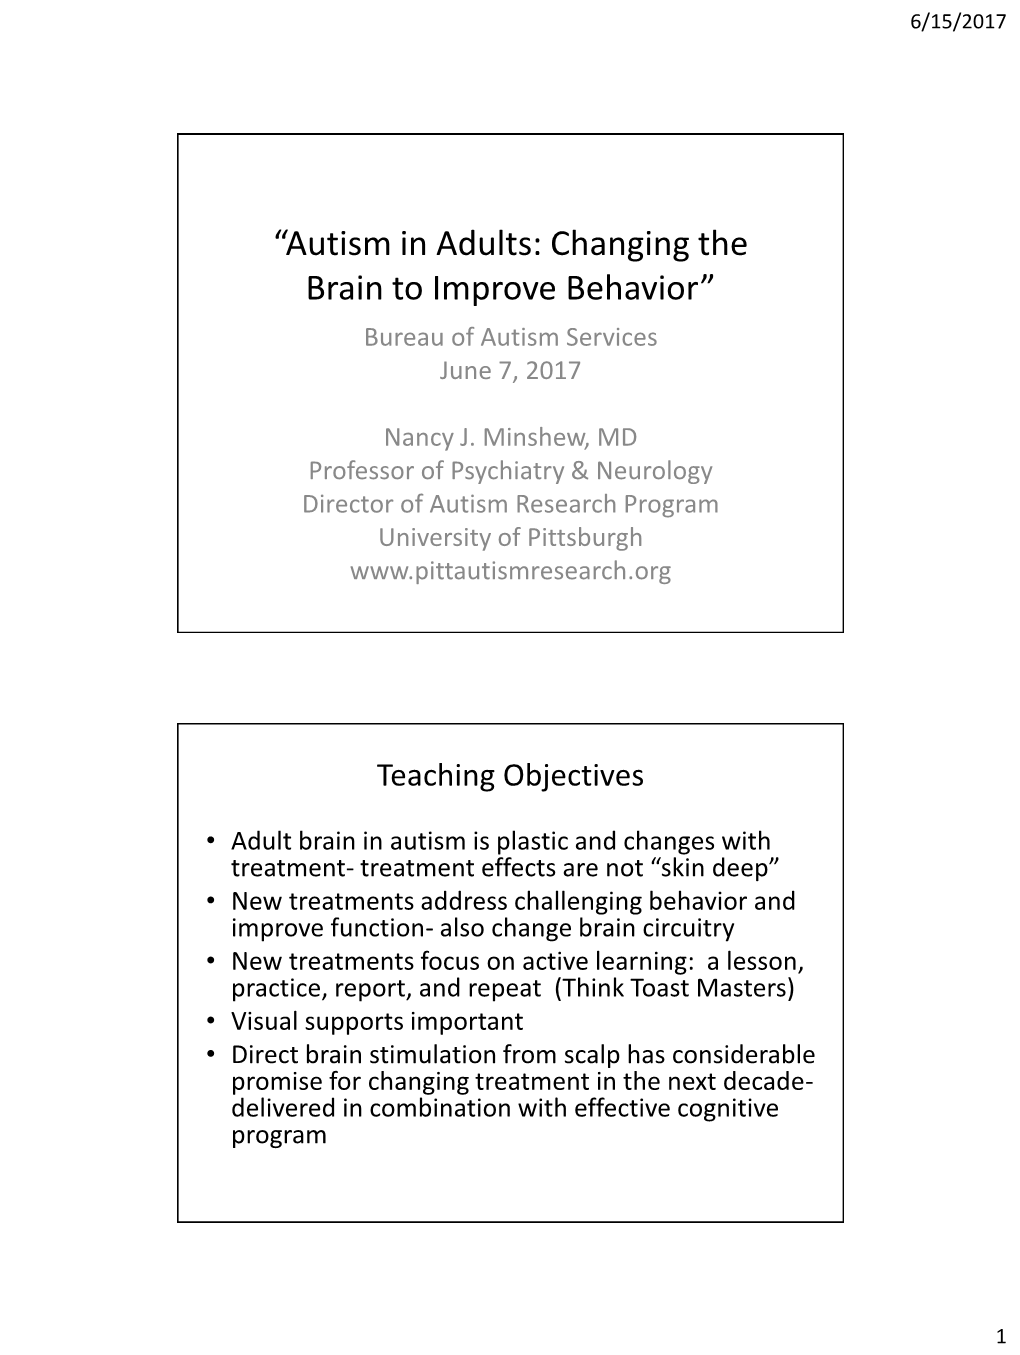 “The Brain in Autism: Basis for Ability, Disability & Treatment”